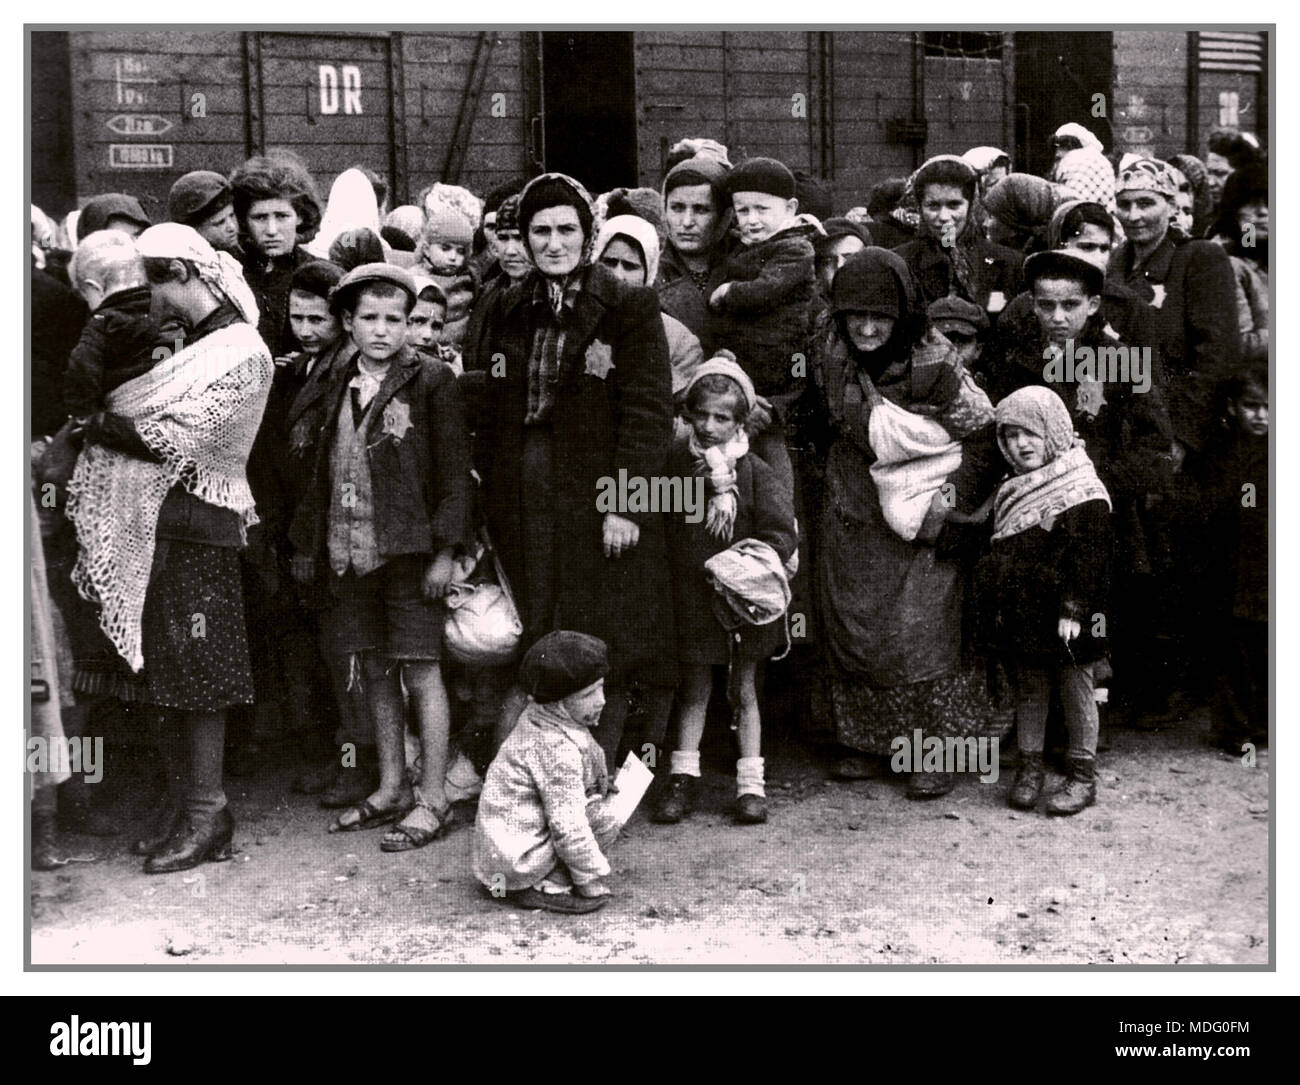 German Nazi Holocaust death camp Auschwitz in Poland, arrival of Hungarian Jews of all ages, wearing the instructed Jewish Star of David. Waiting on the Nazi ‘grading’ system of a life with torture and starvation or summary death in gas chambers. Summer 1944.World War II Stock Photo